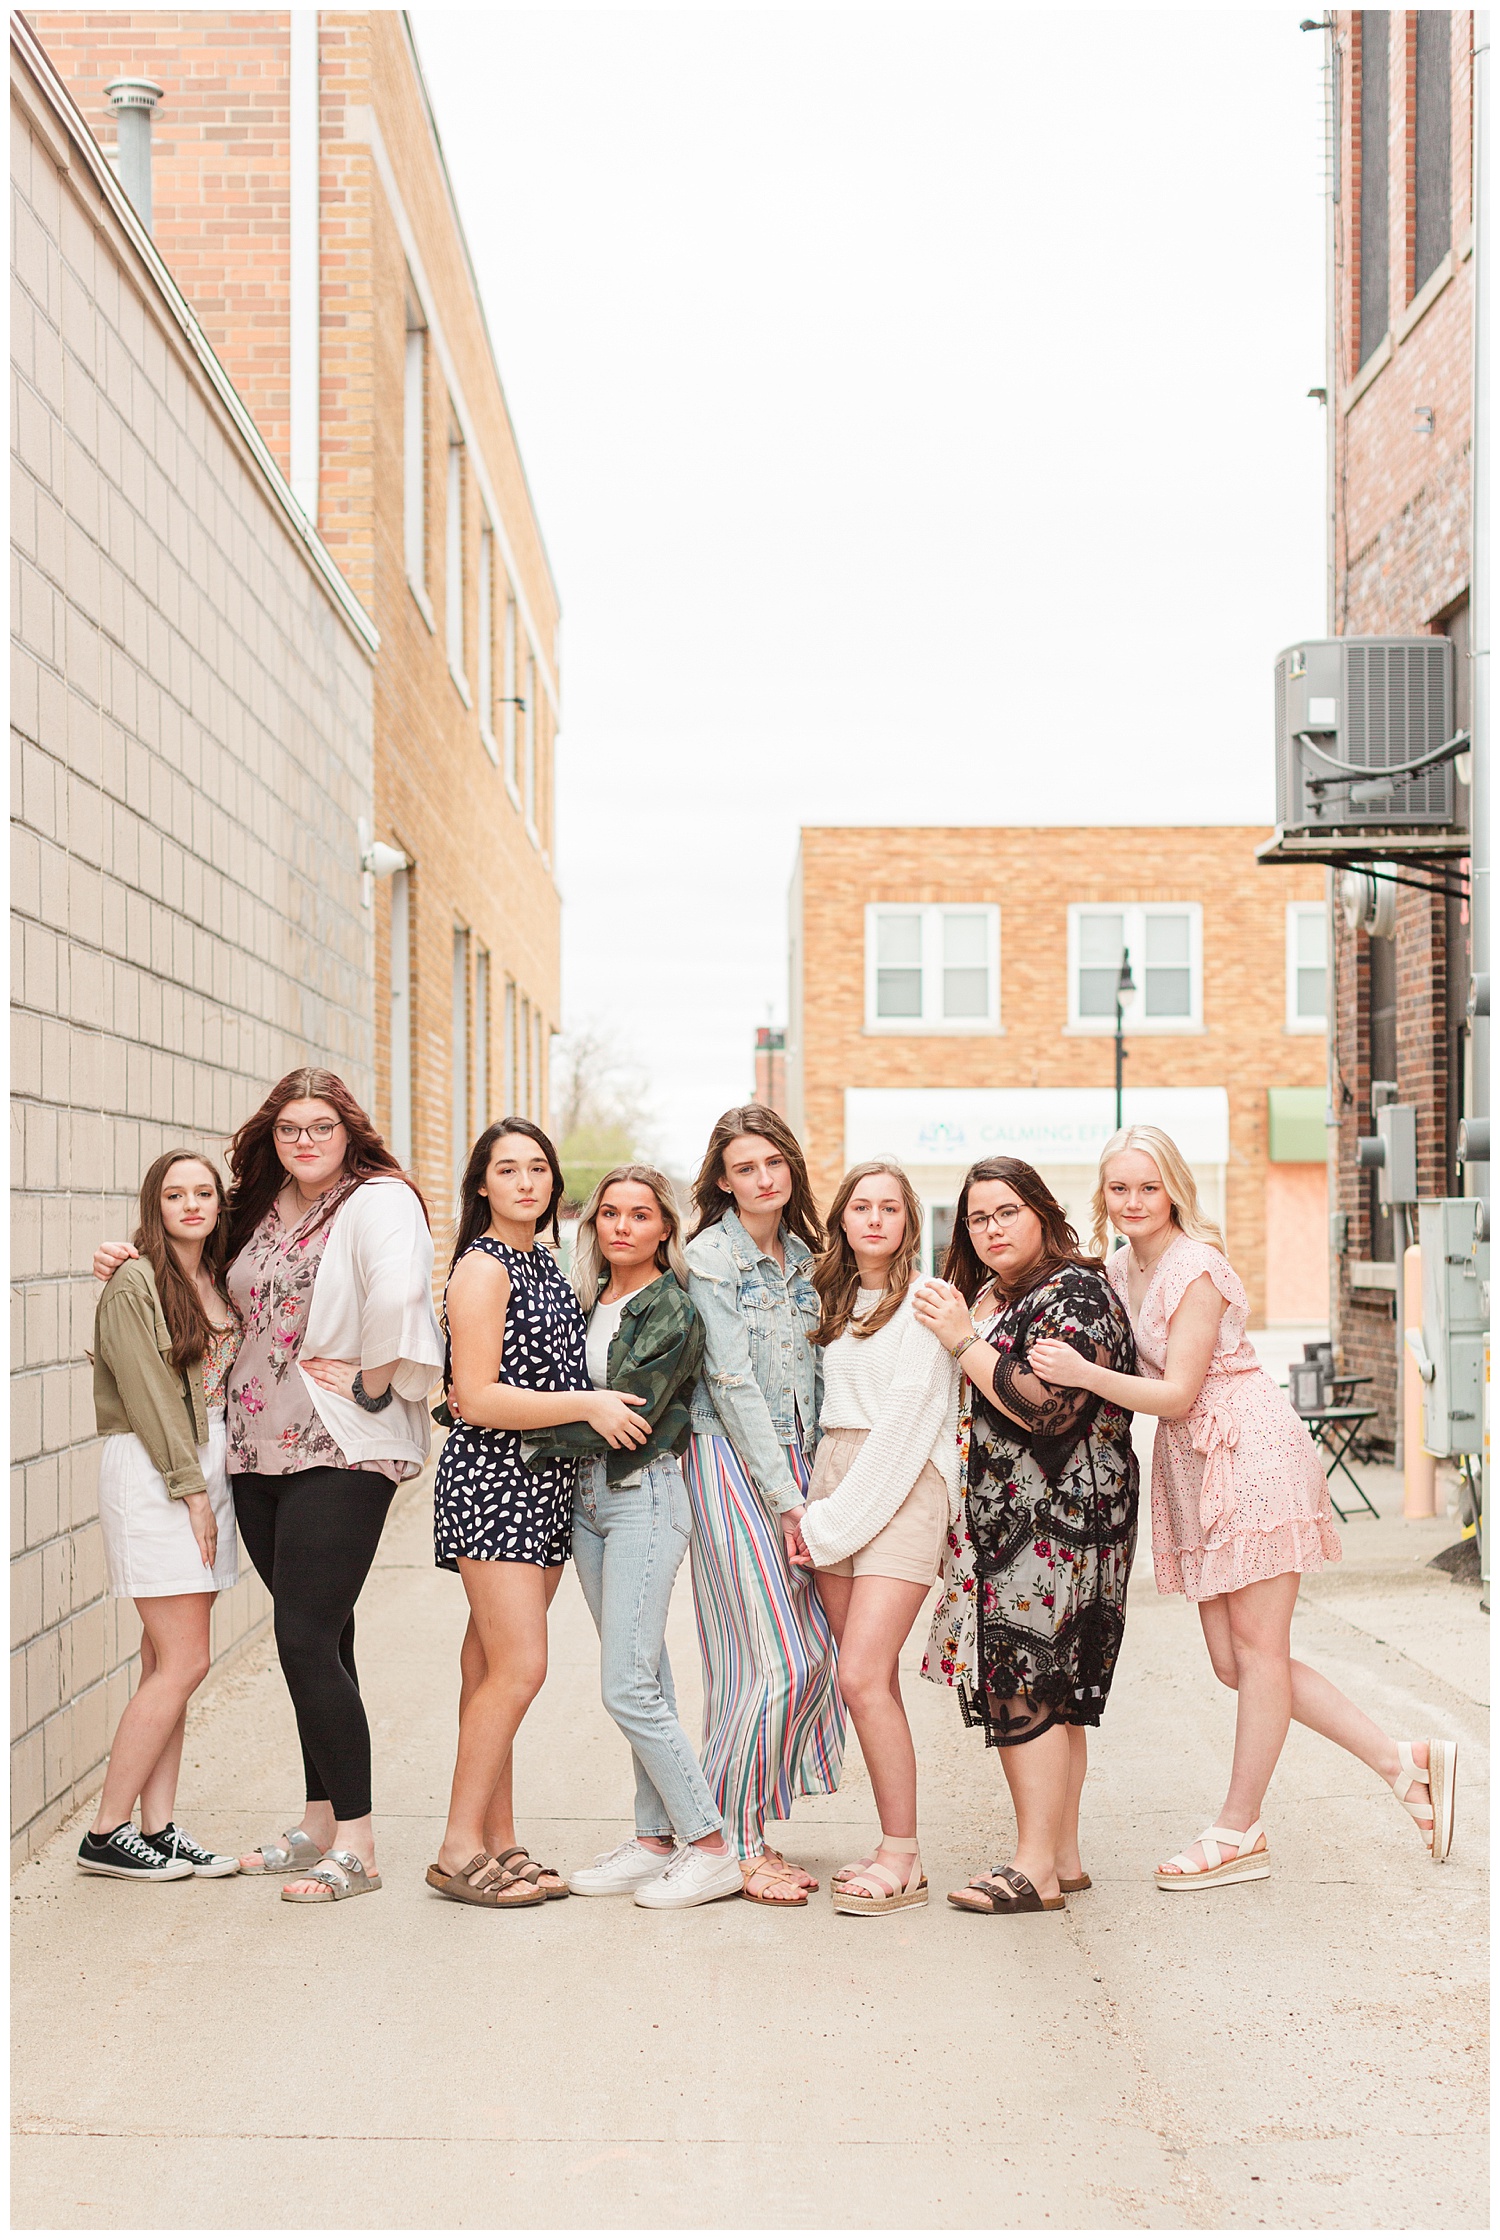 2022 CBS Senior Spokesmodel Team pose downtown Algona, Iowa. Styled in outfits from Cultivate Boutique | CB Studio